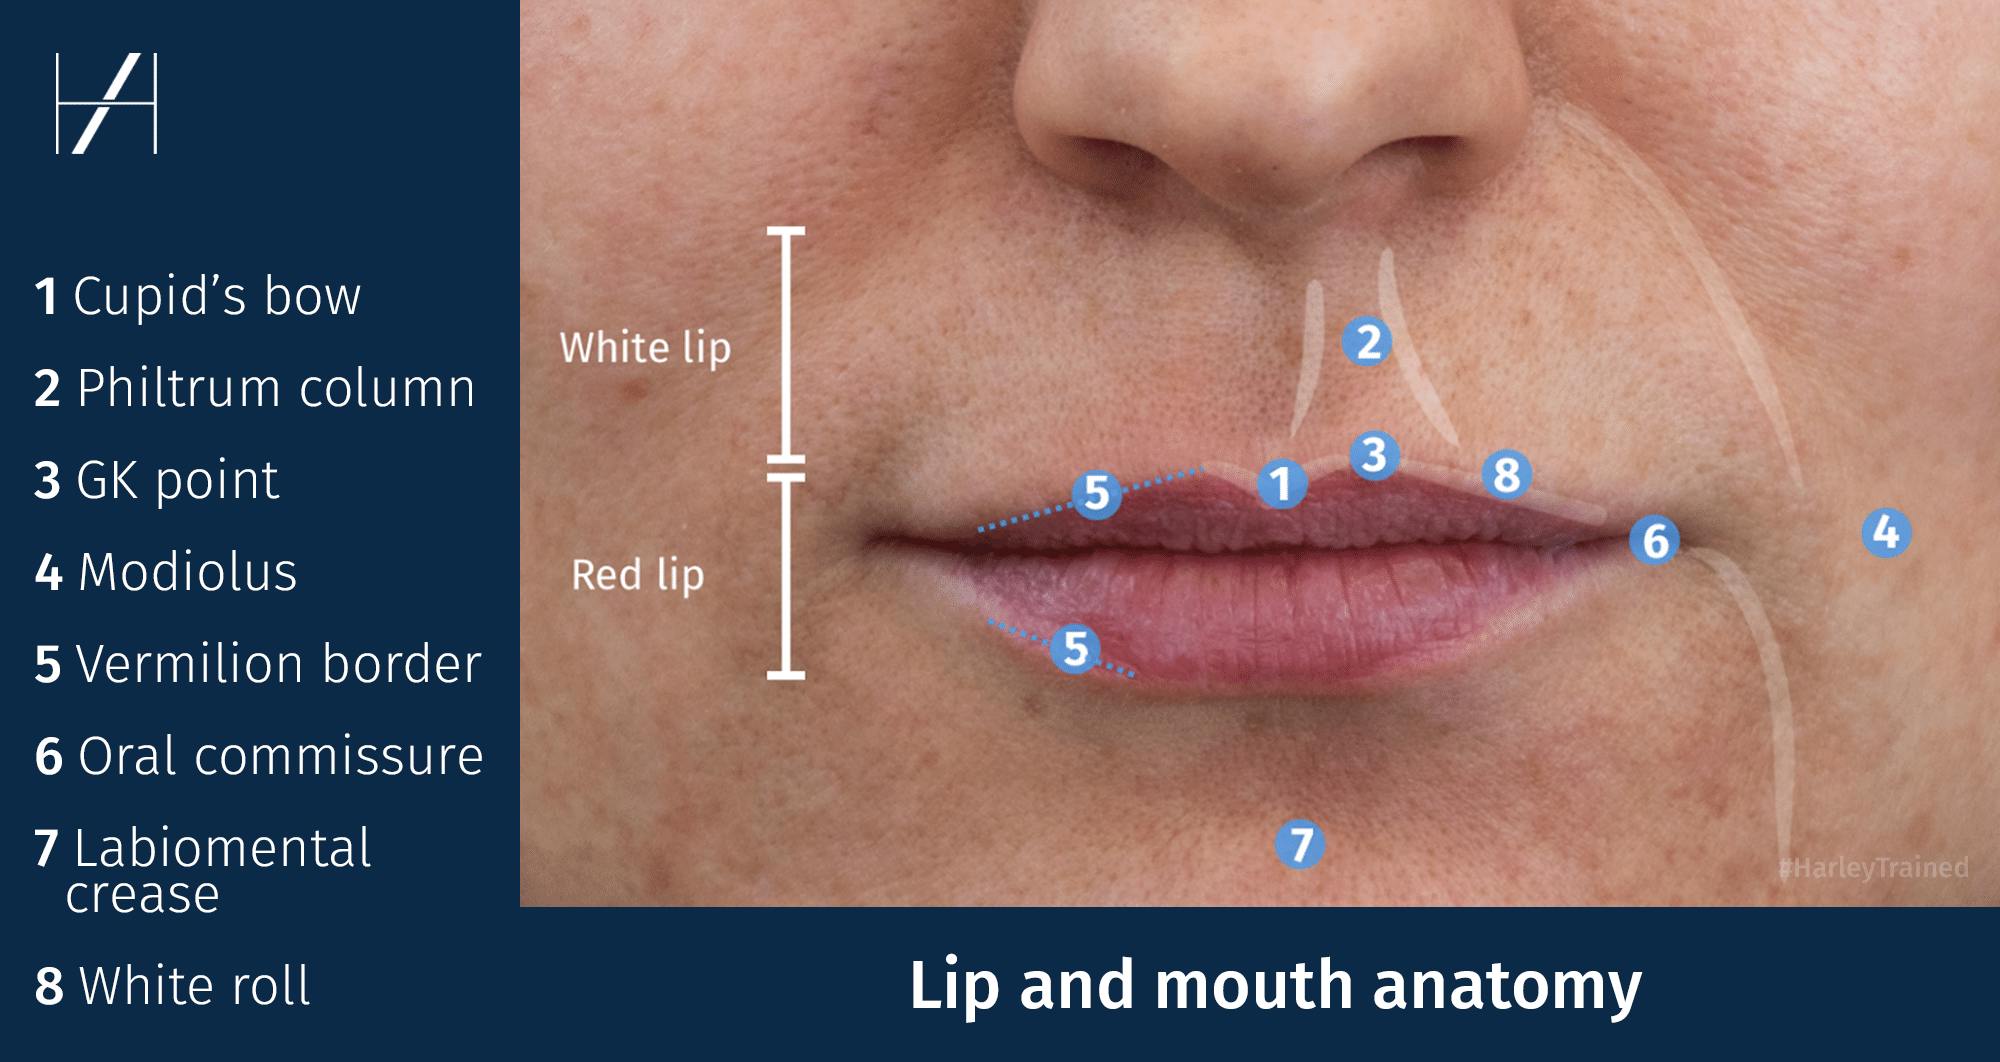 Lip and mouth anatomy